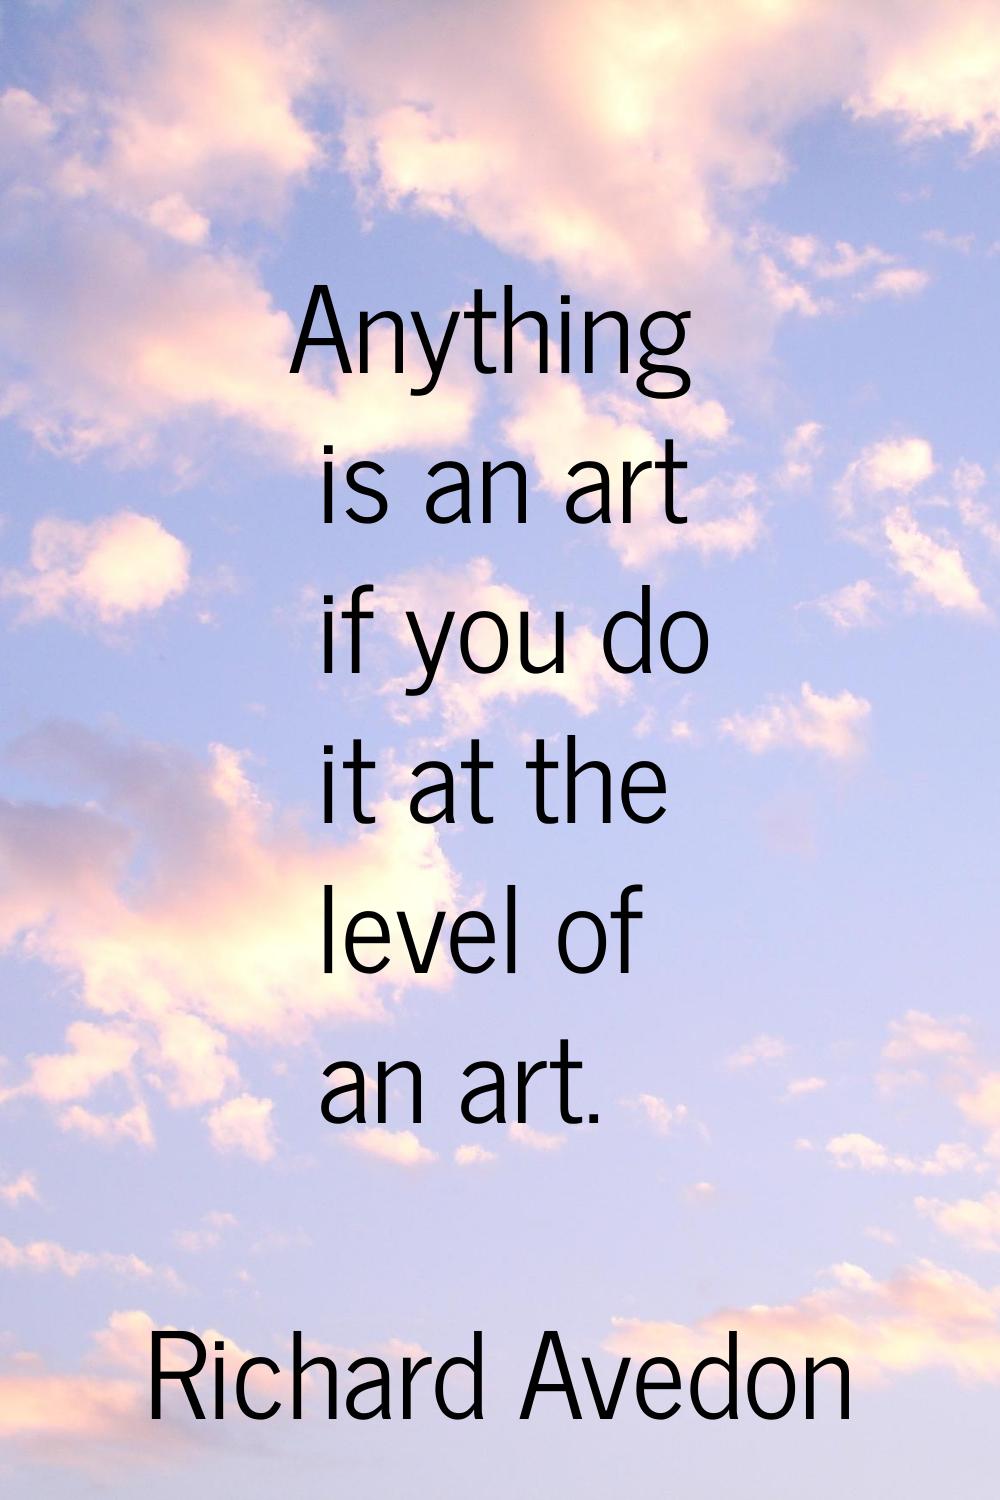 Anything is an art if you do it at the level of an art.